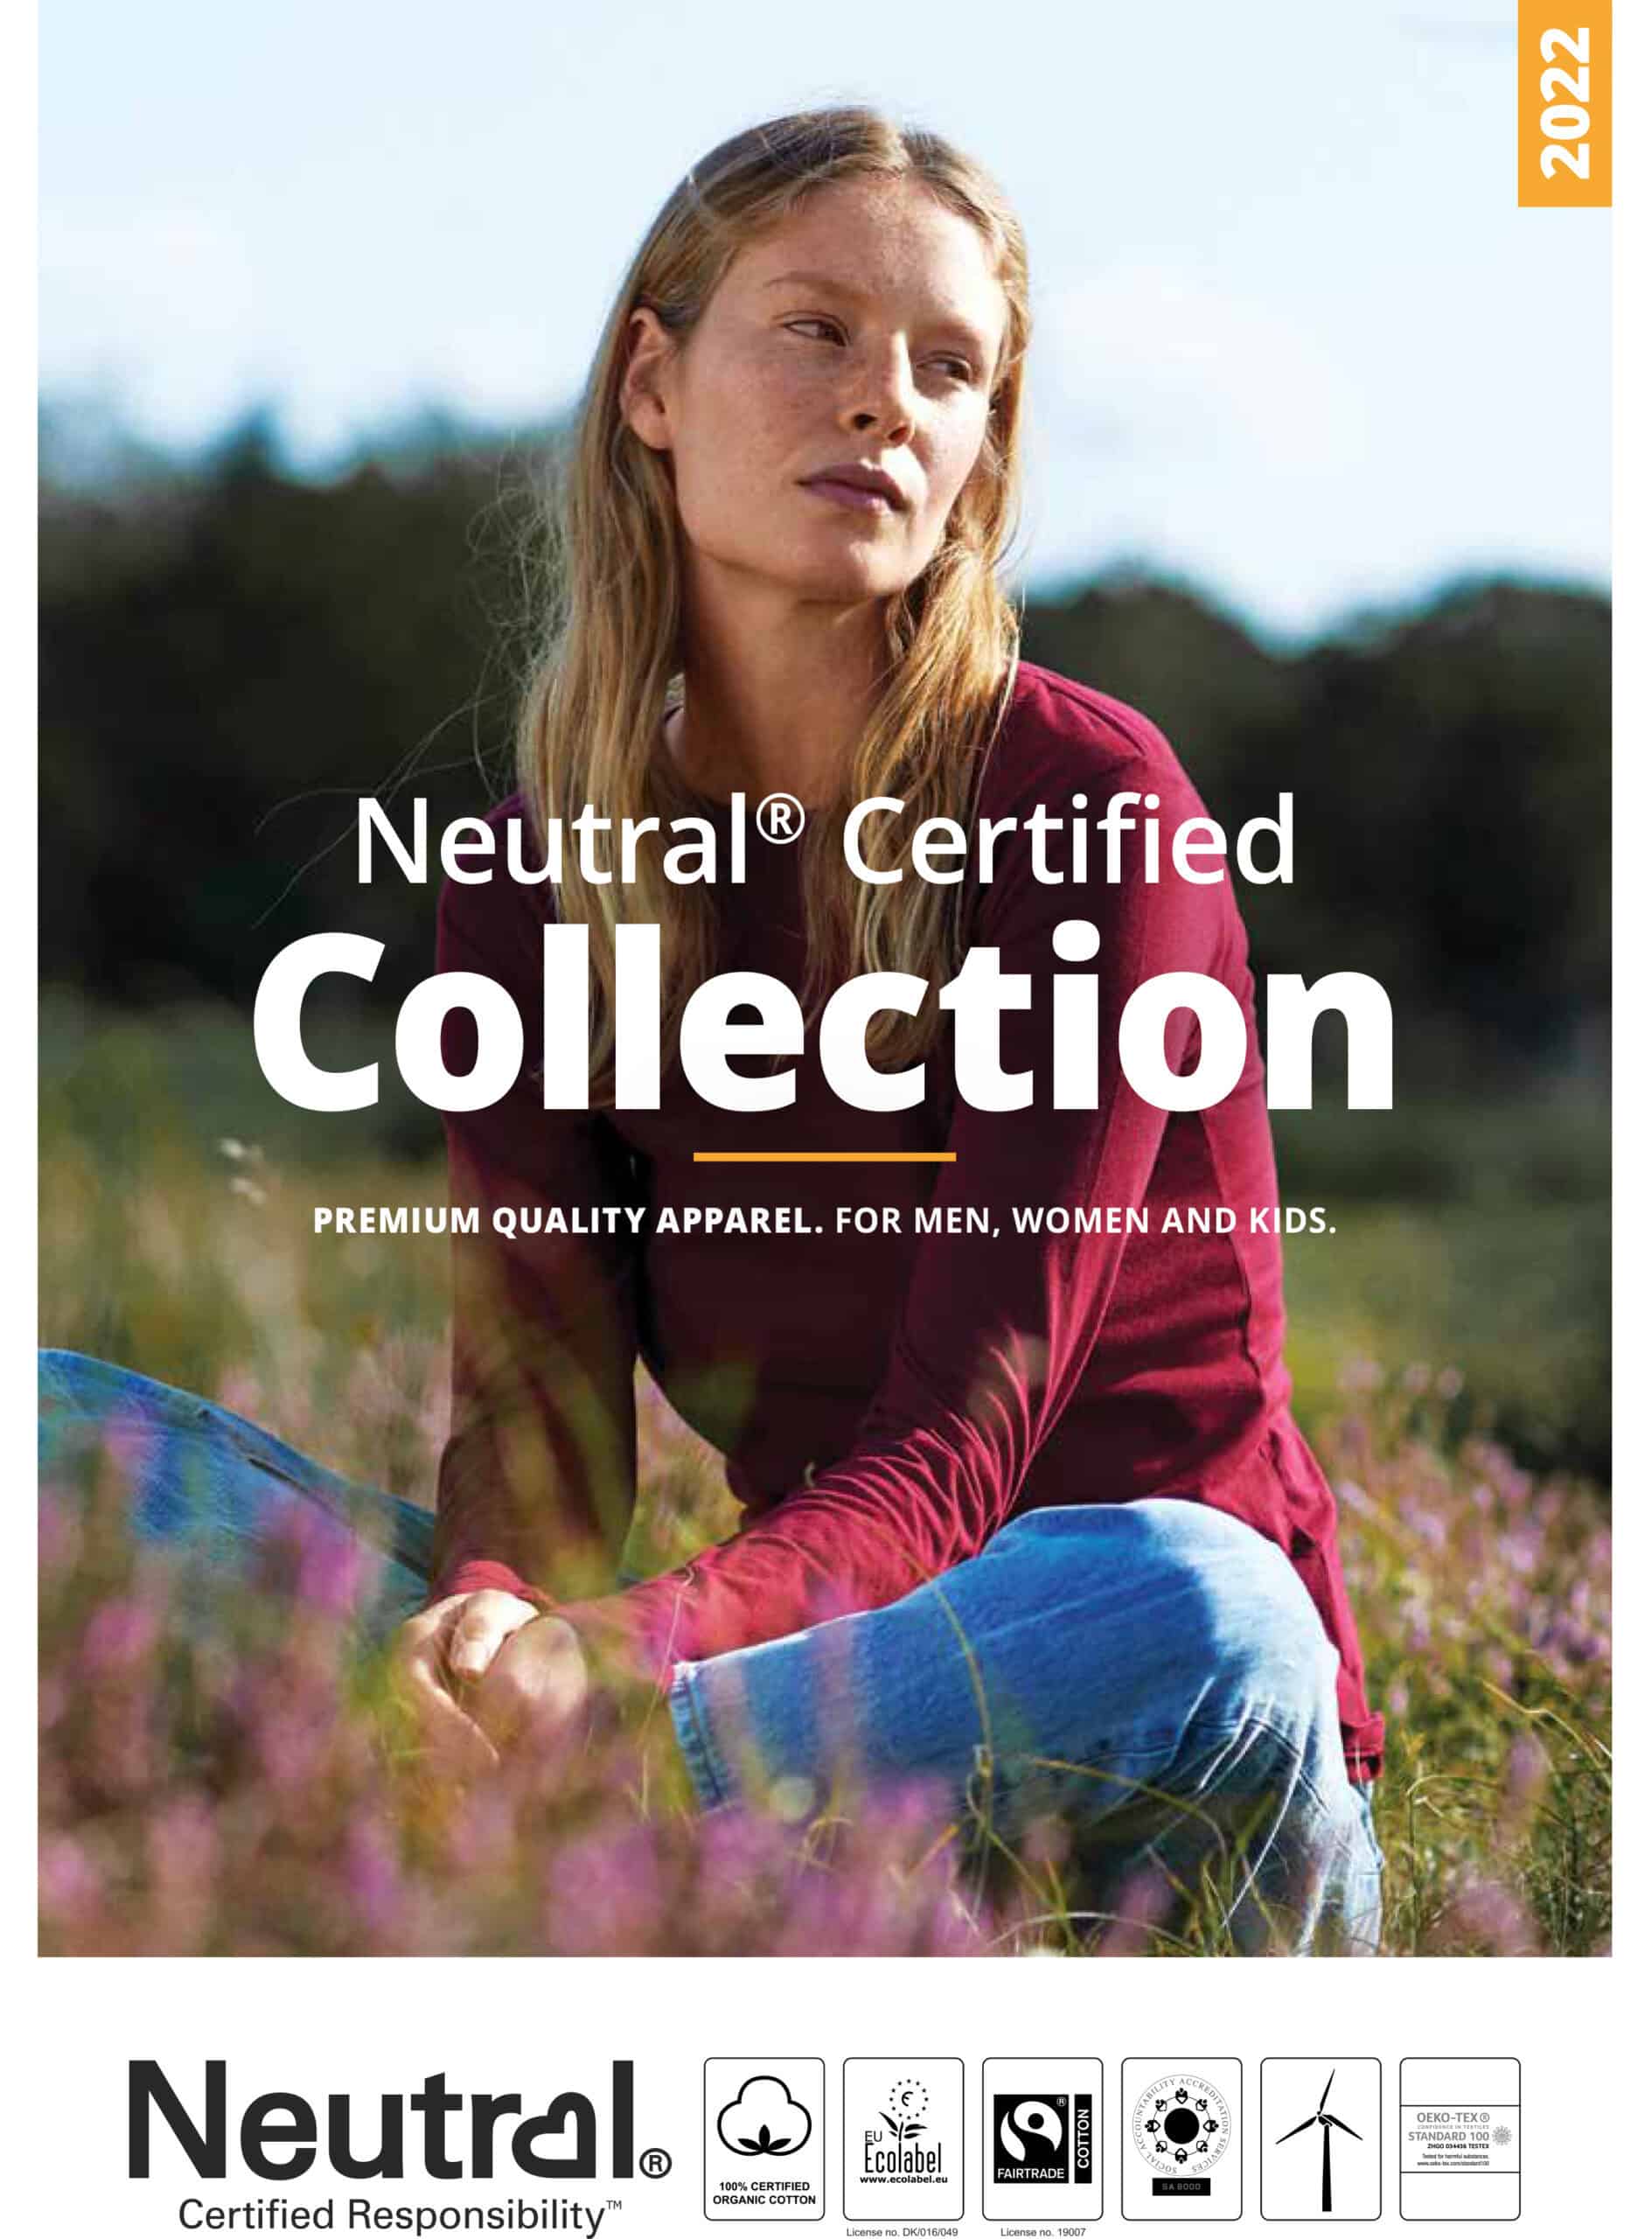 neutral-catalogue-cover-woman-in-red-sweater-and-blue-jeans-in-a-grass-field-2022